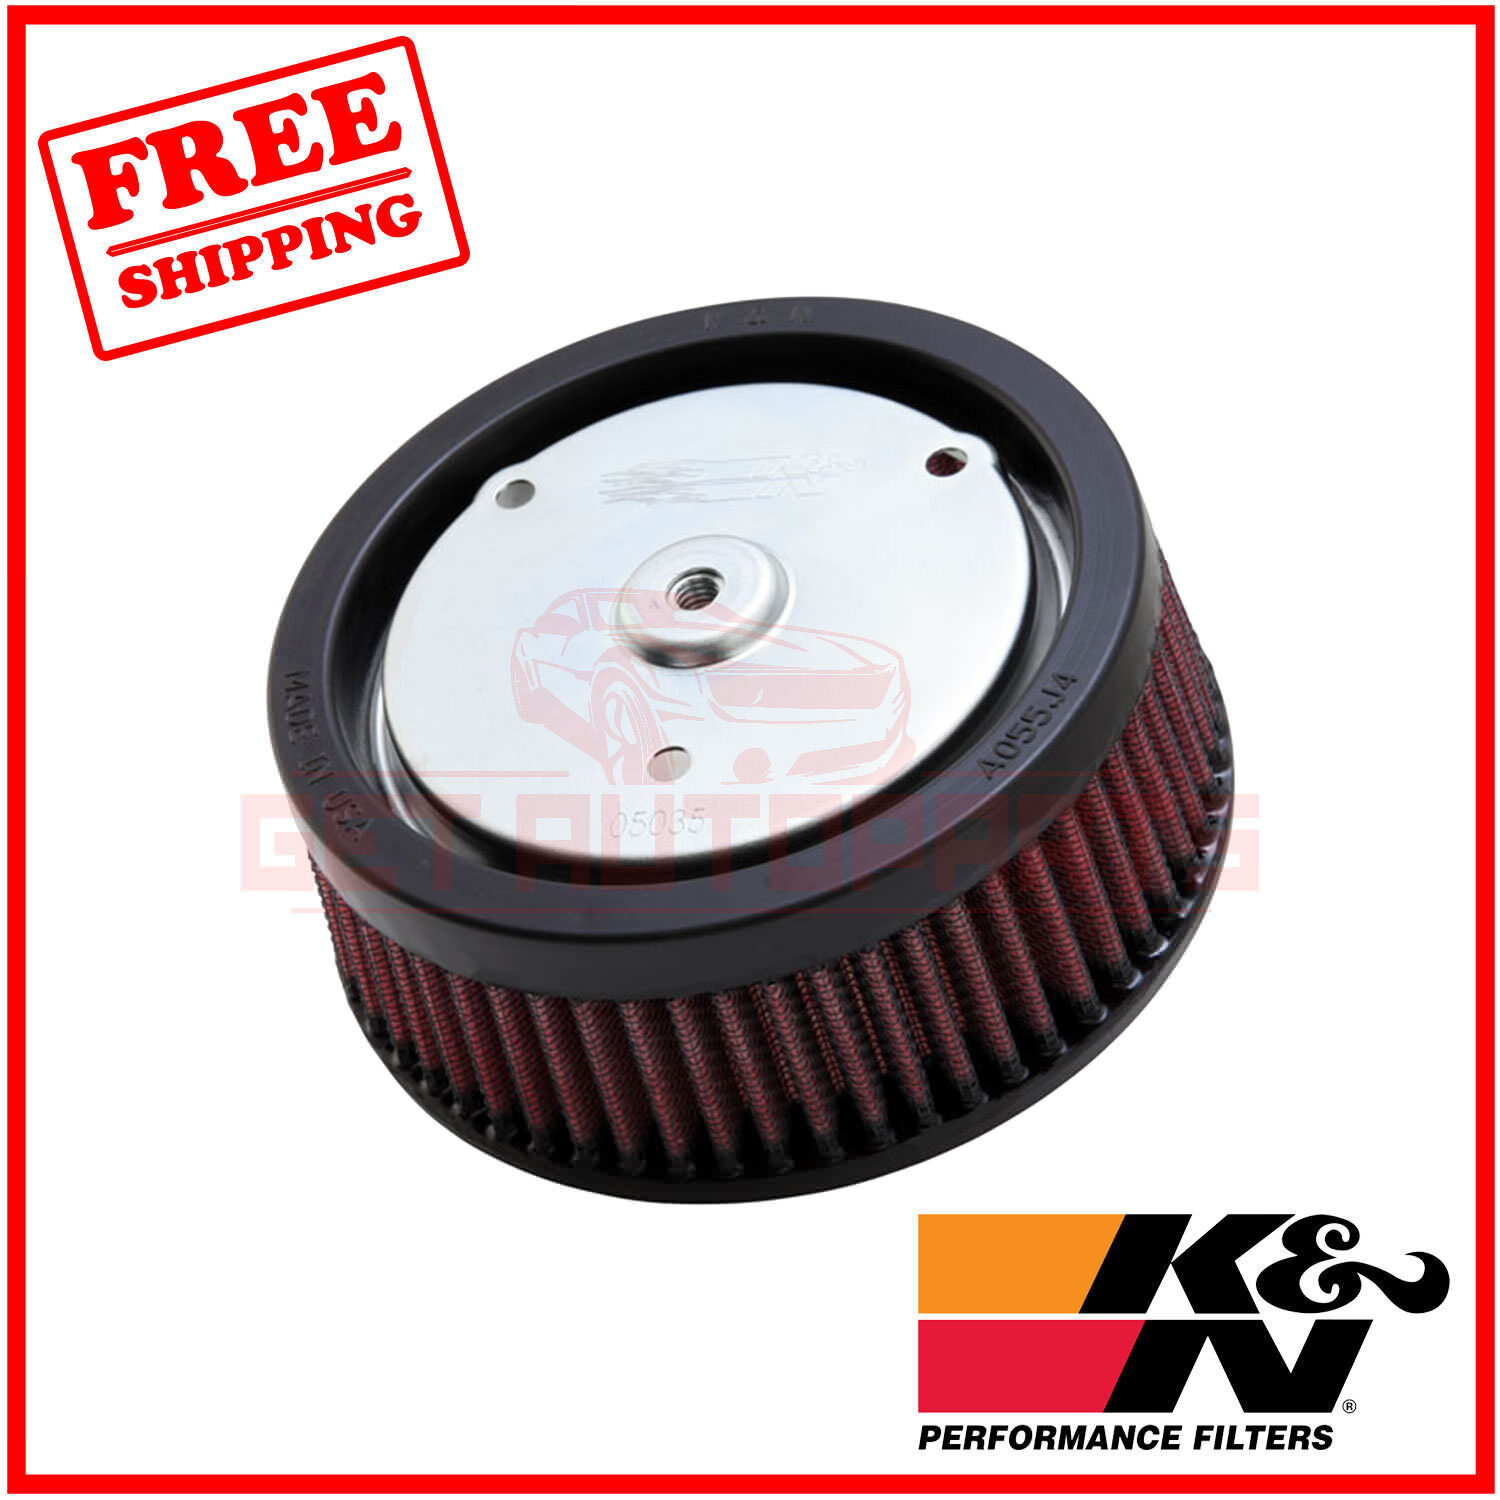 K&N Replacement Air Filter for Harley Davidson FLHTCU Electra Glide 2007-2009